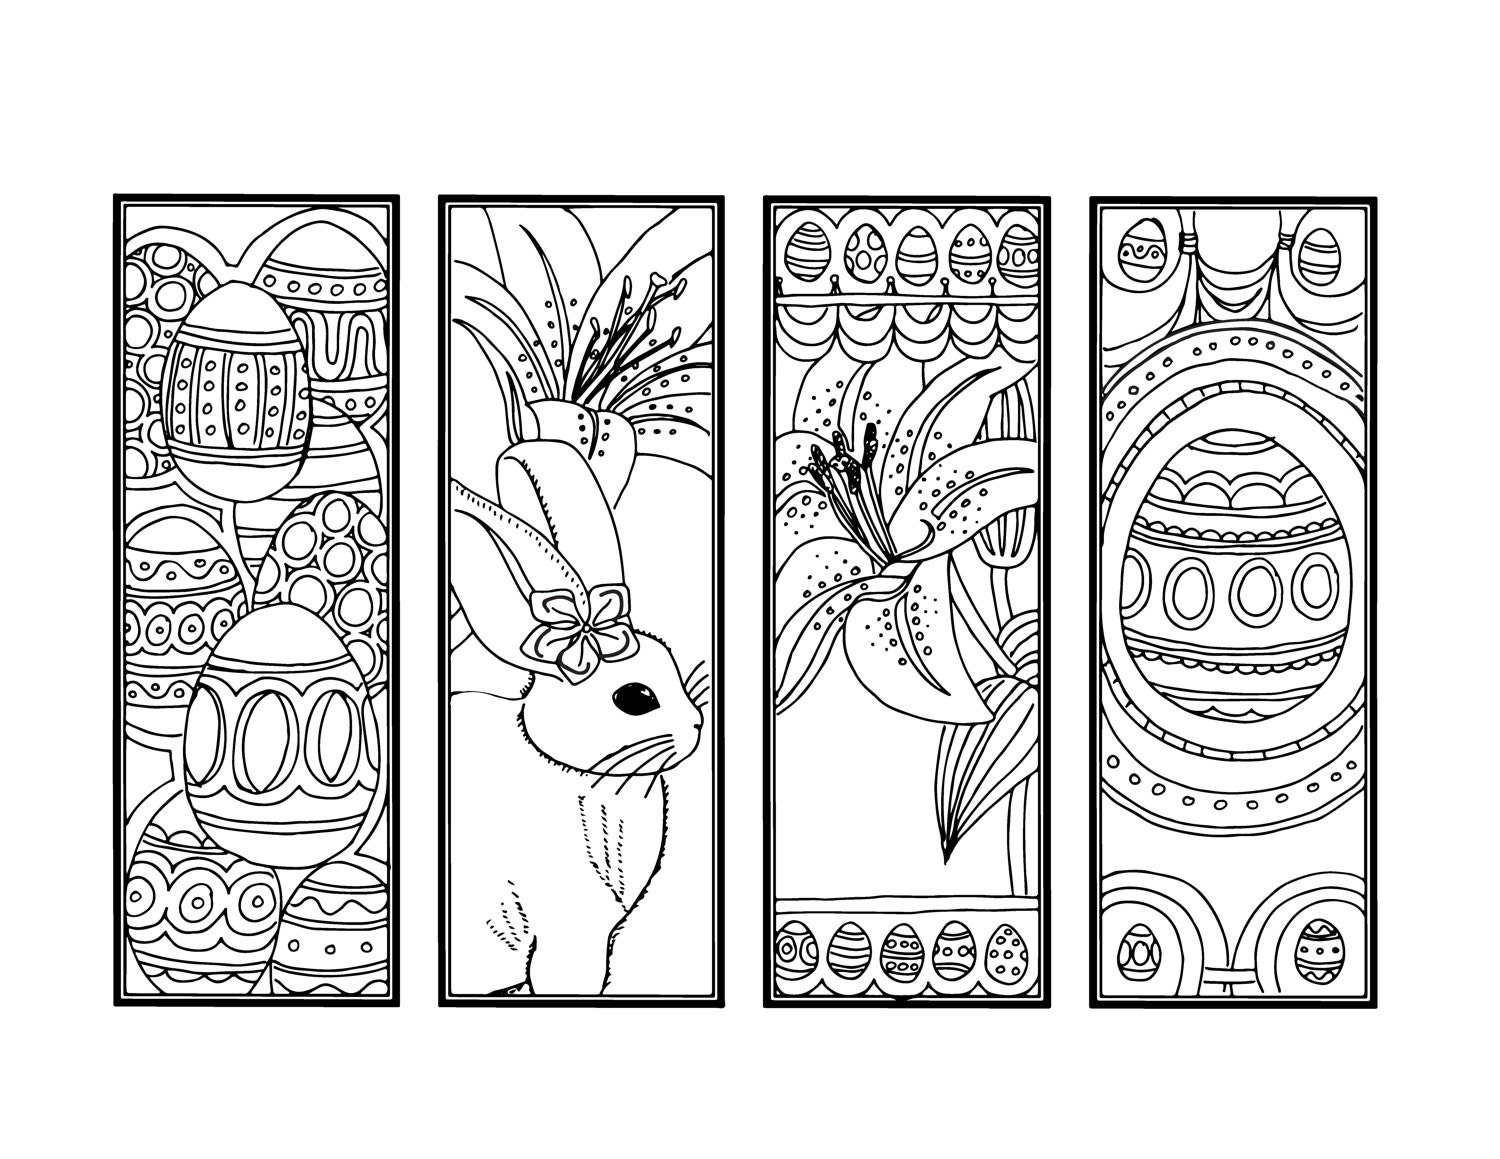 Download DIY Easter Bookmarks Printable Coloring Page Adult Coloring